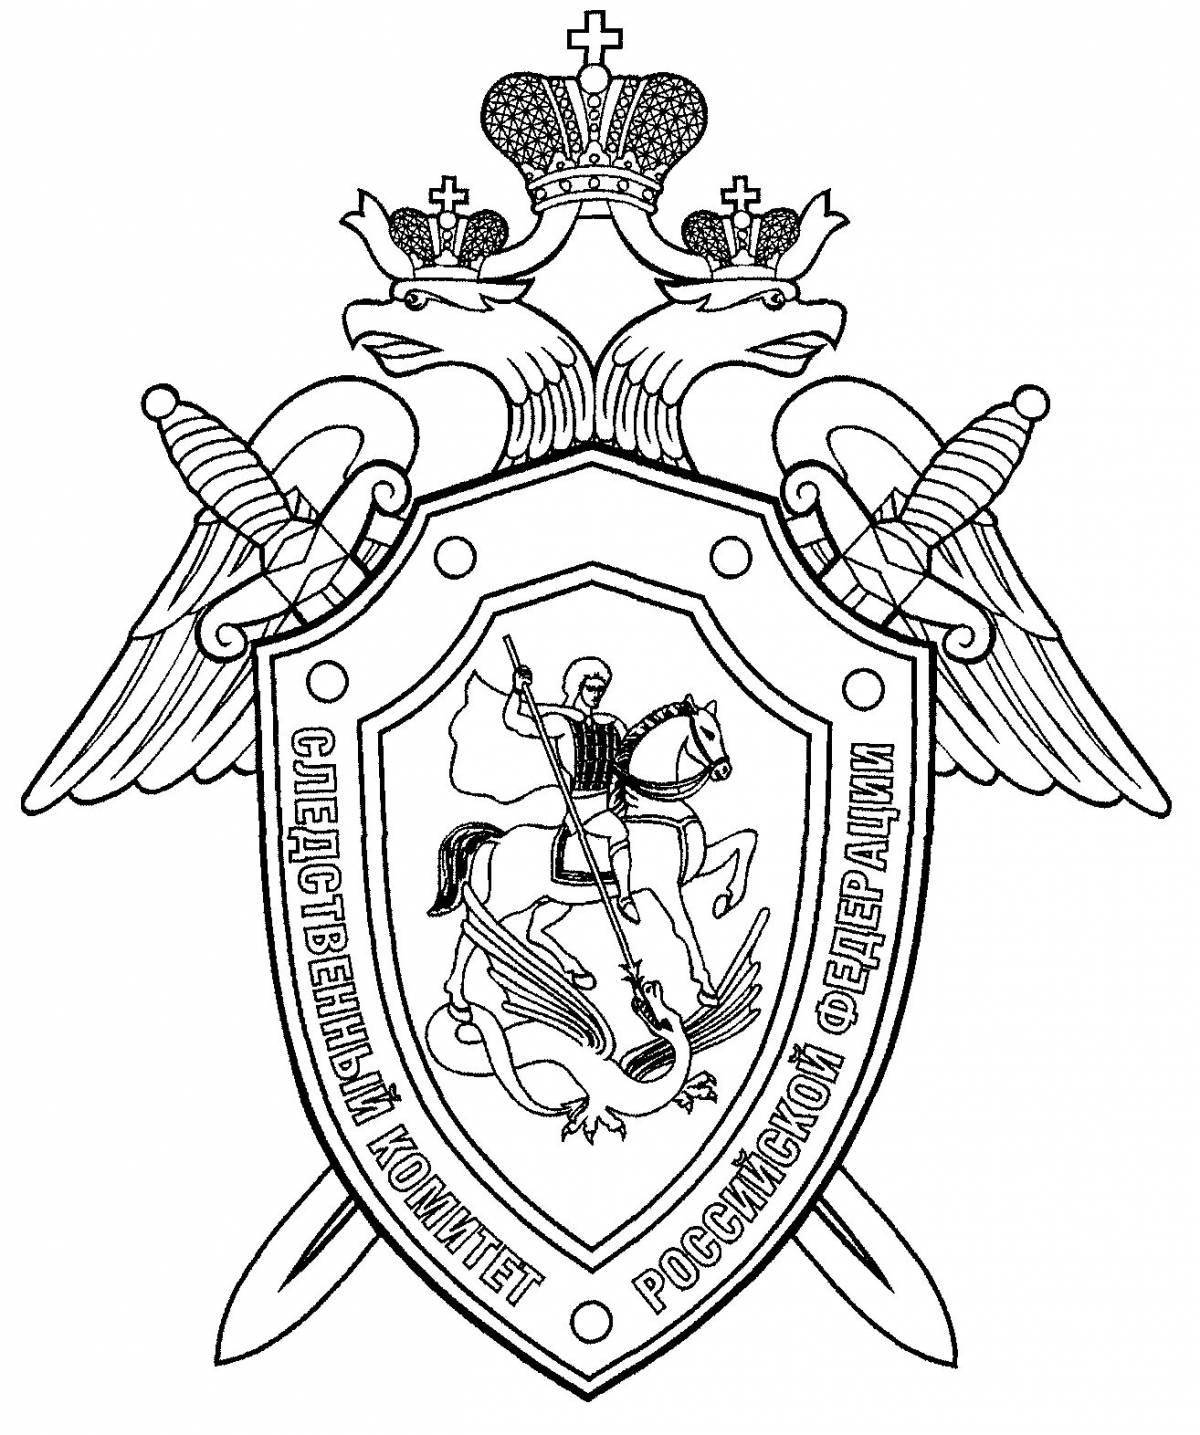 Glowing national guard coloring page